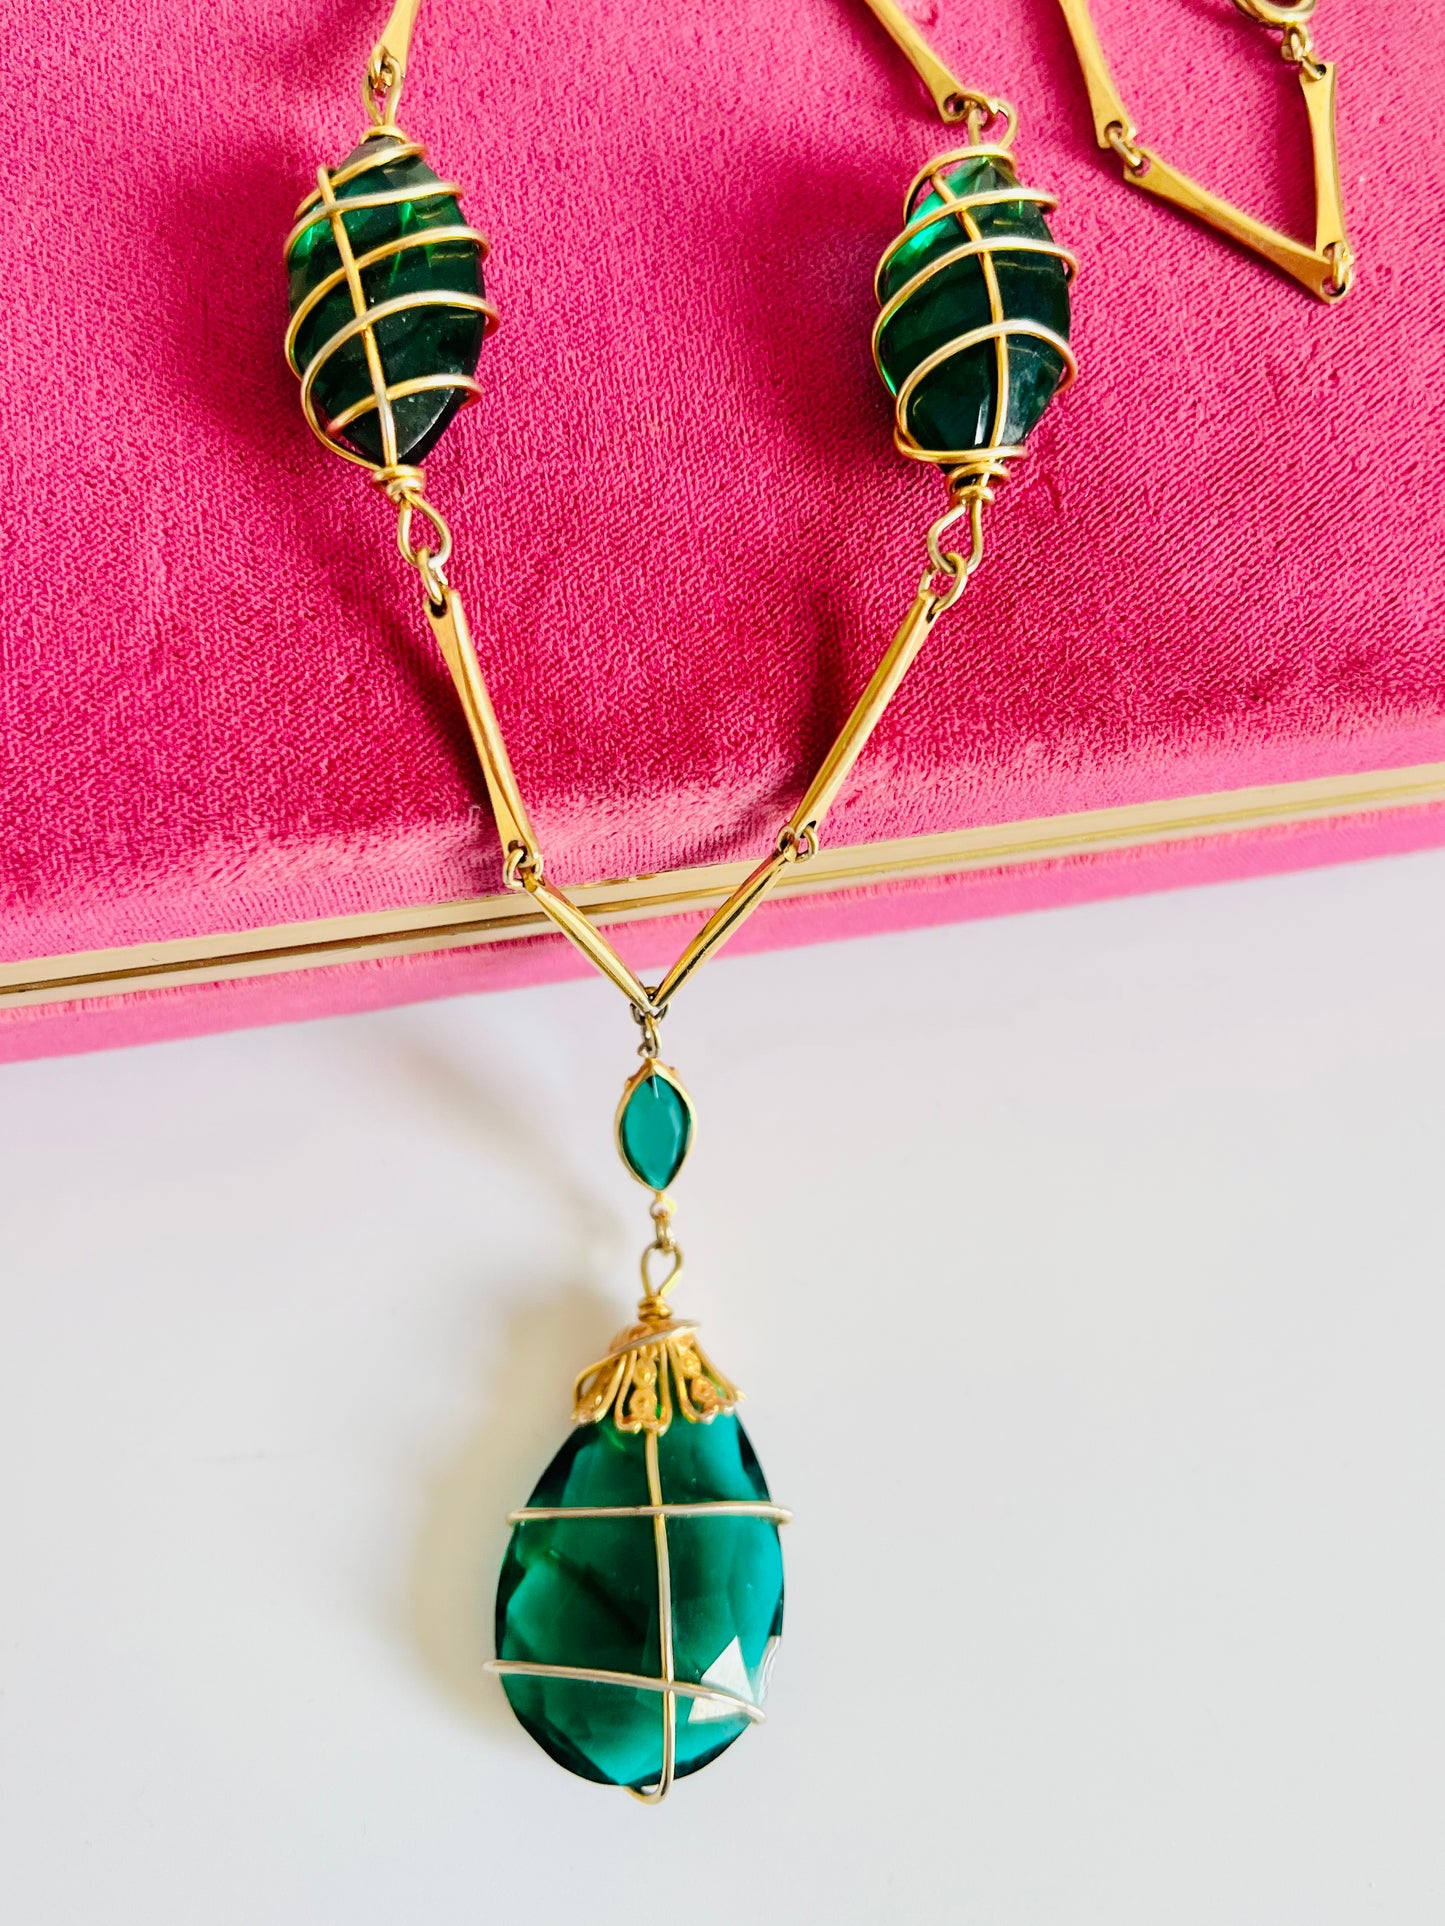 Vintage Green Wrapped Glass Pendant Necklace